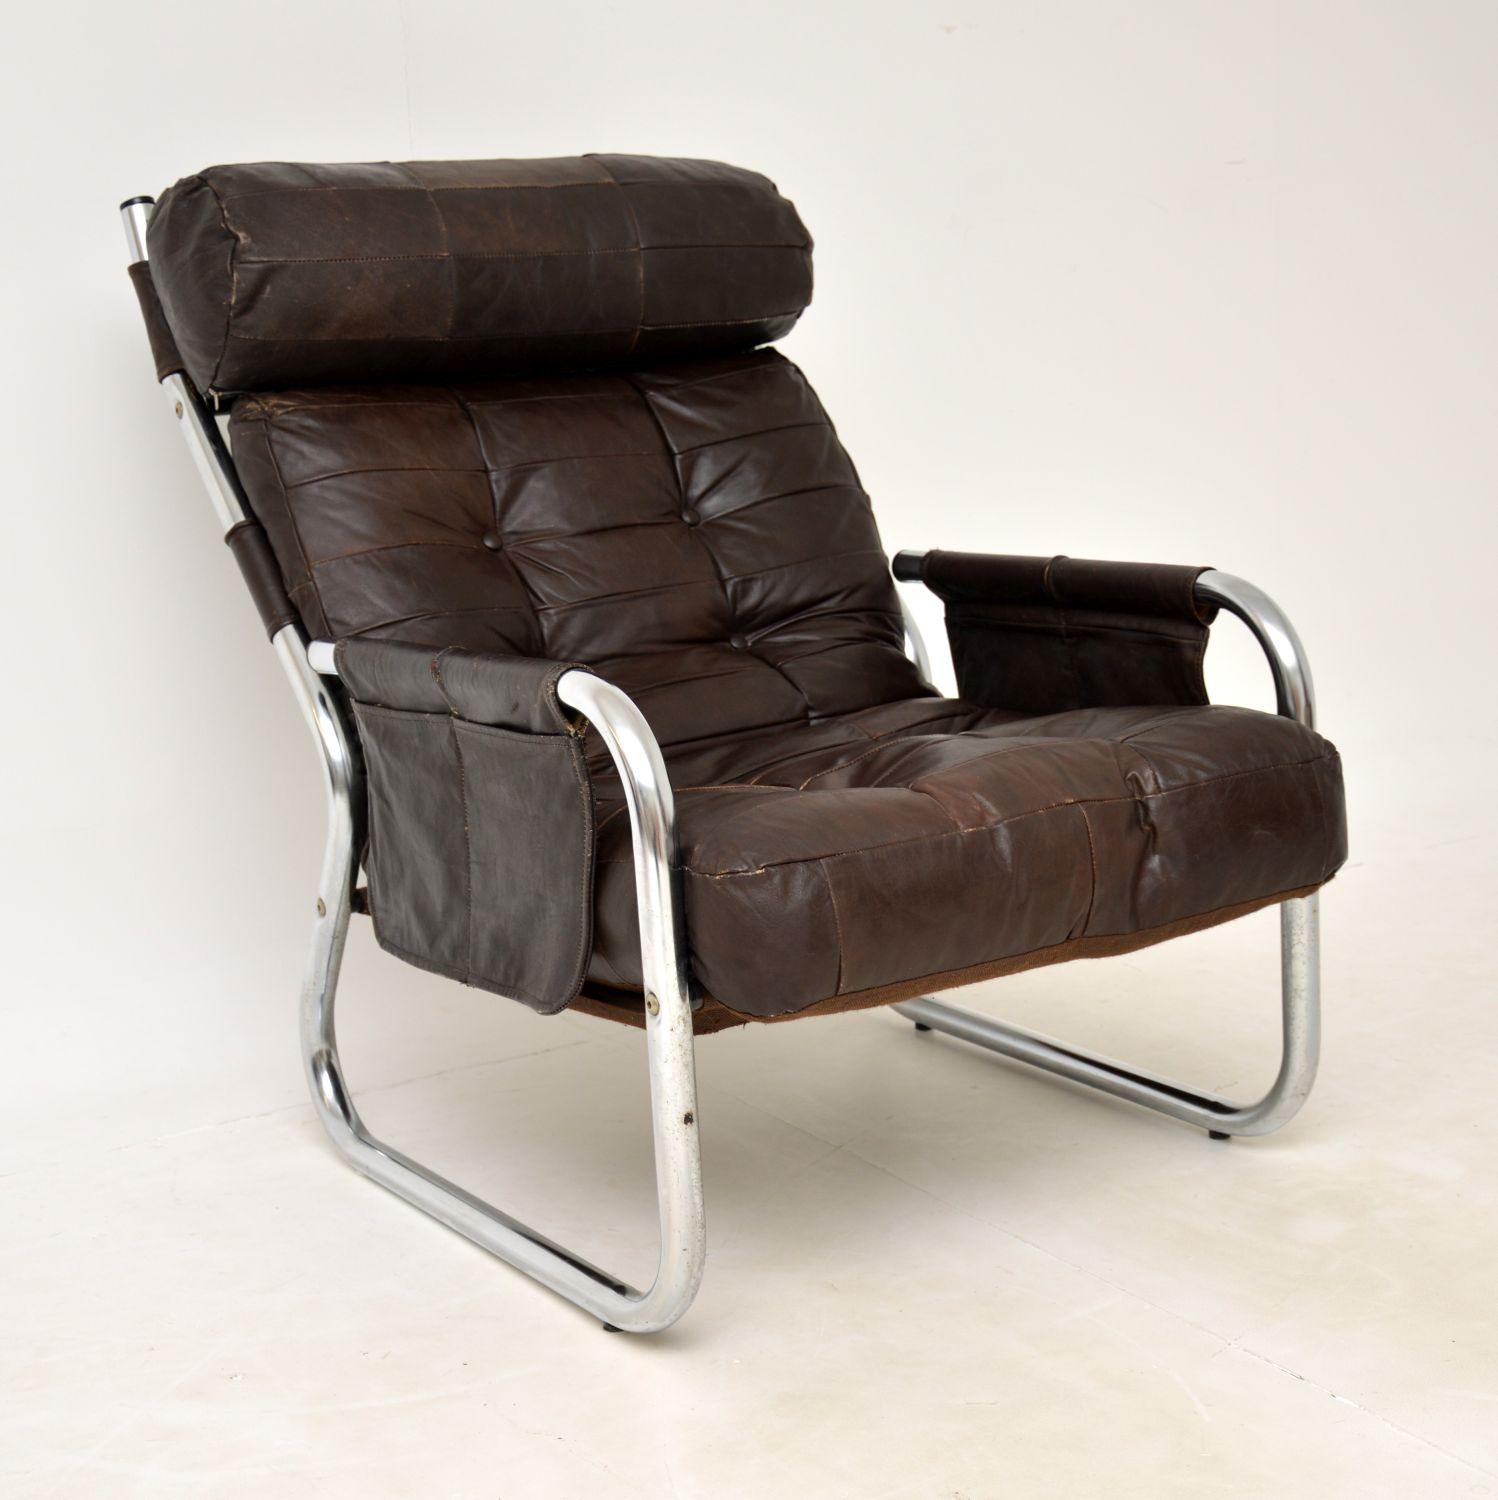 A stylish and extremely comfortable vintage Danish armchair in leather and chrome. This was recently imported from Denmark, it dates from the 1960-1970’s.

The quality is excellent, with a nicely shaped thick tubular steel frame and patchwork